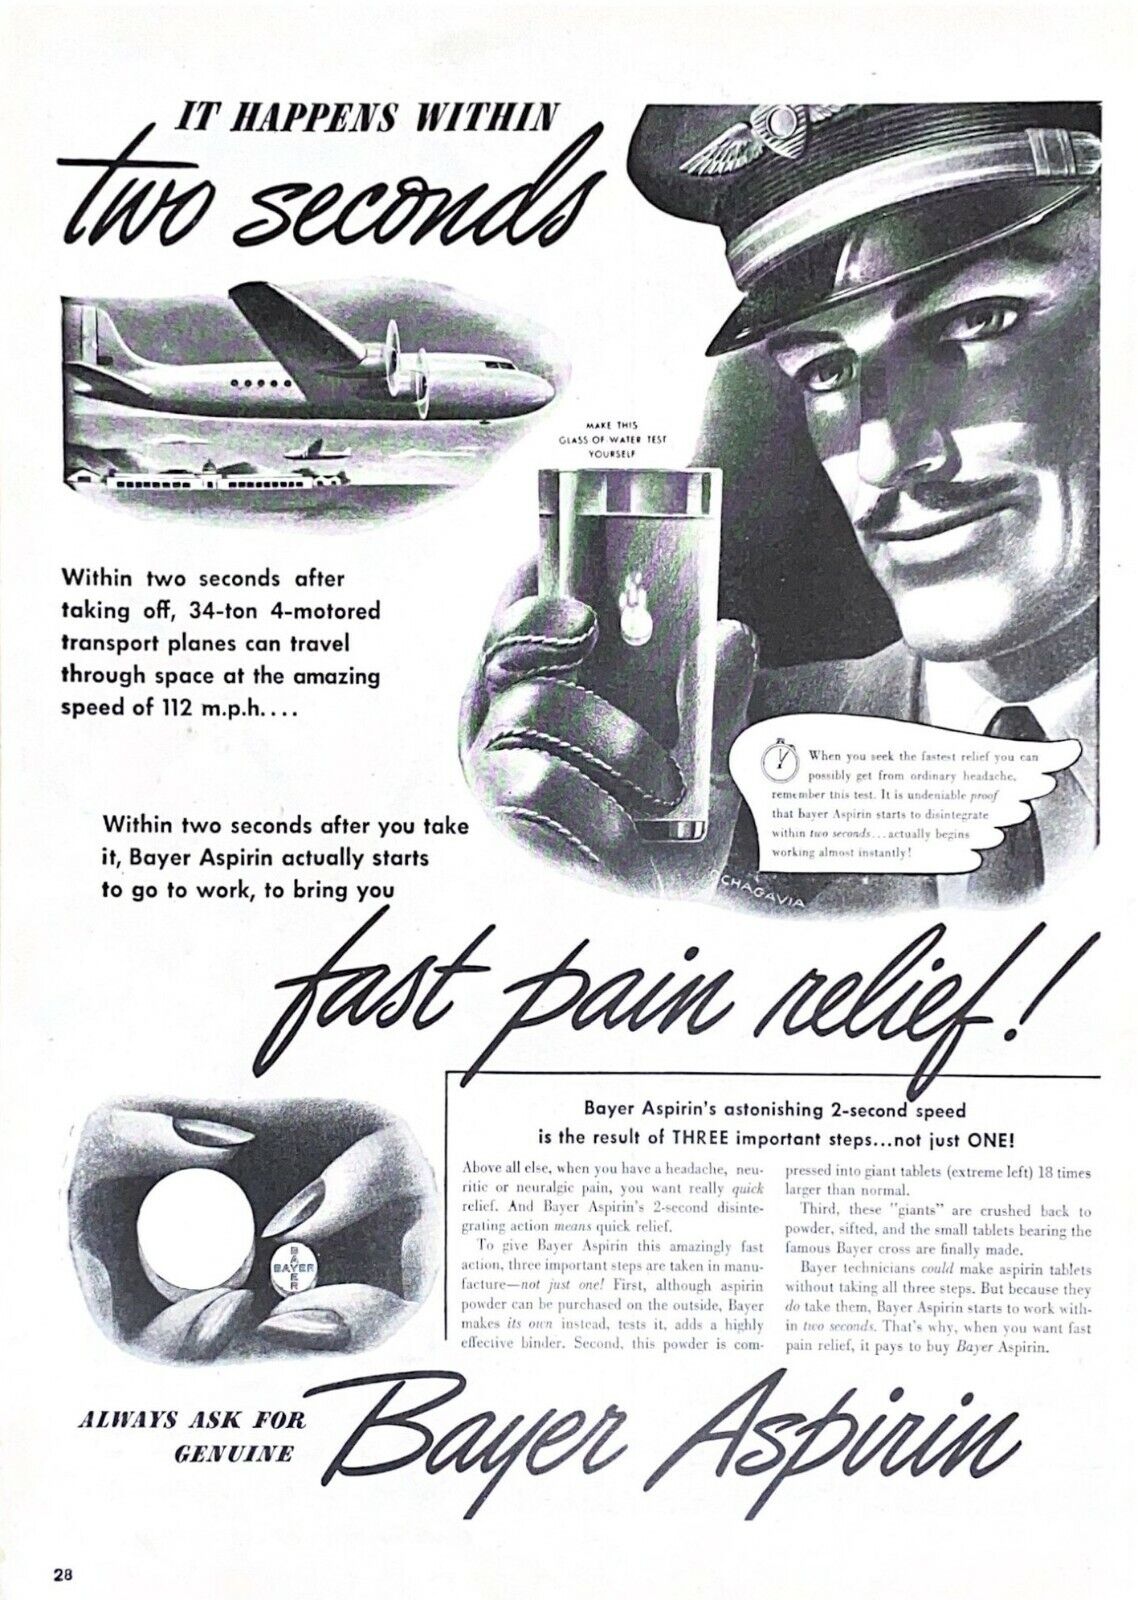 1946 Bayer Aspirin Vintage Print Ad Airplane Pilot It Happens Within 2 Seconds 